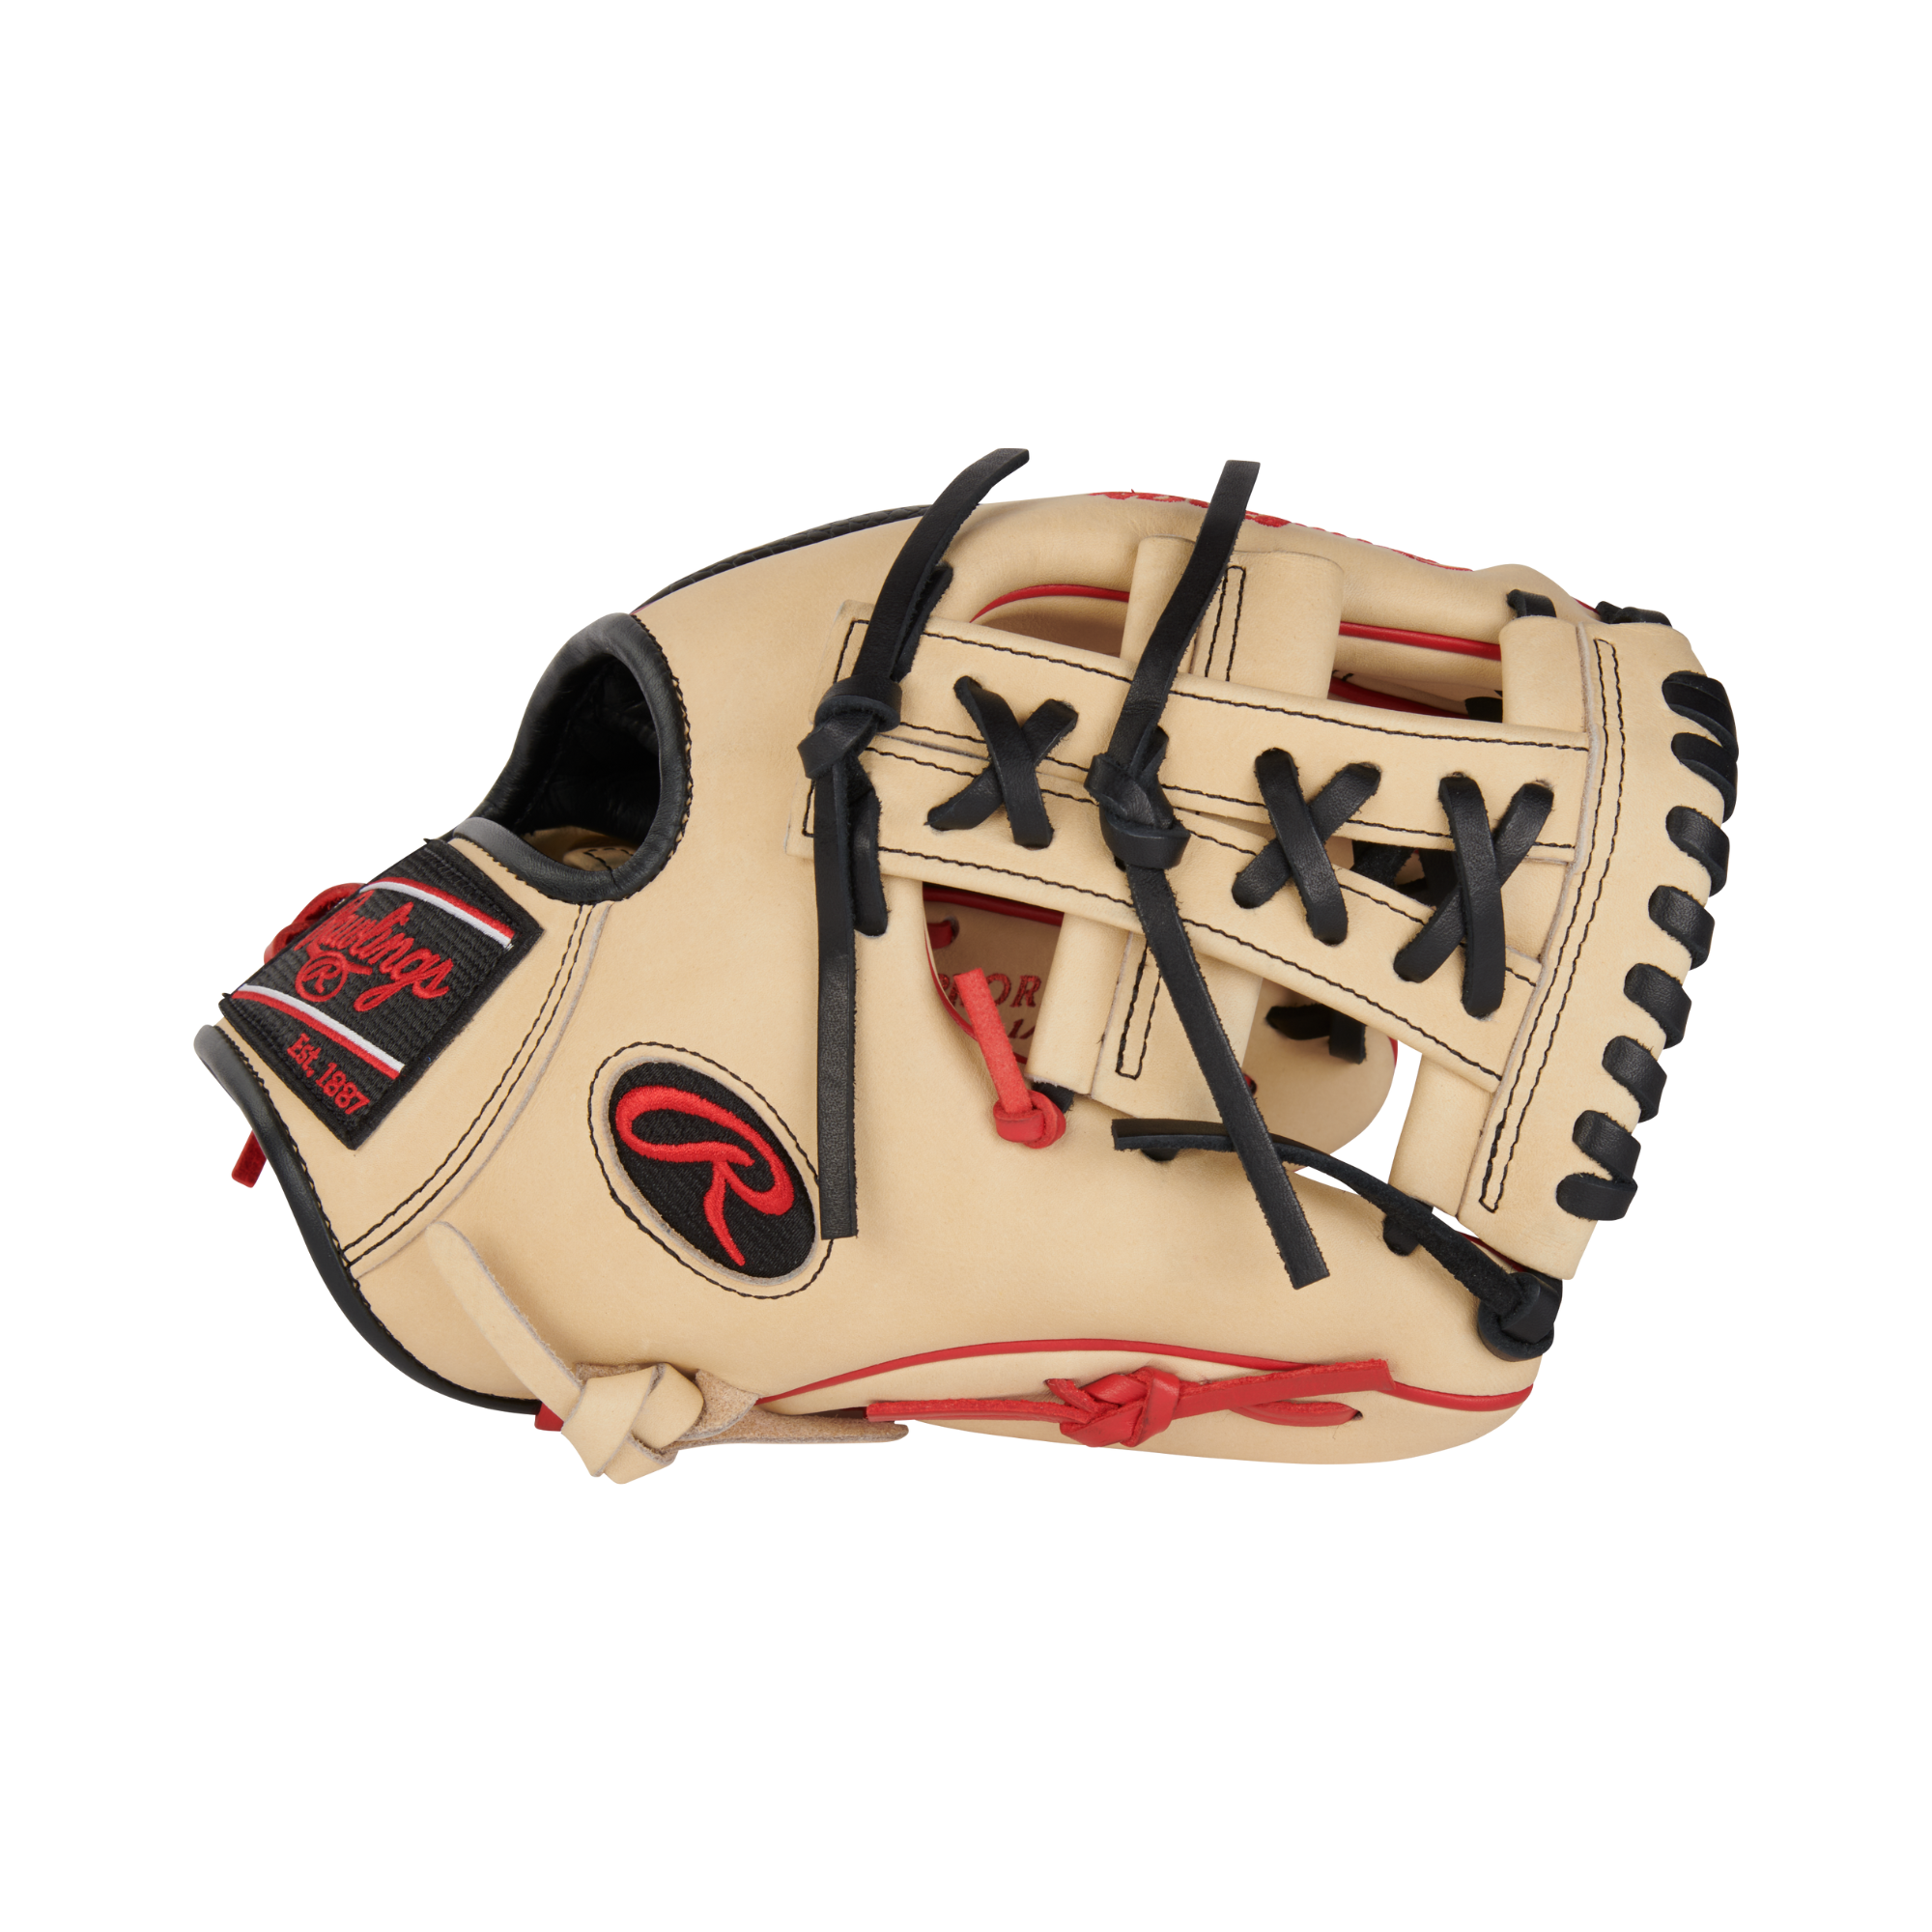 Rawlings Heart Of The Hide With R2G Technology Series Baseball Glove 11.5" RHT